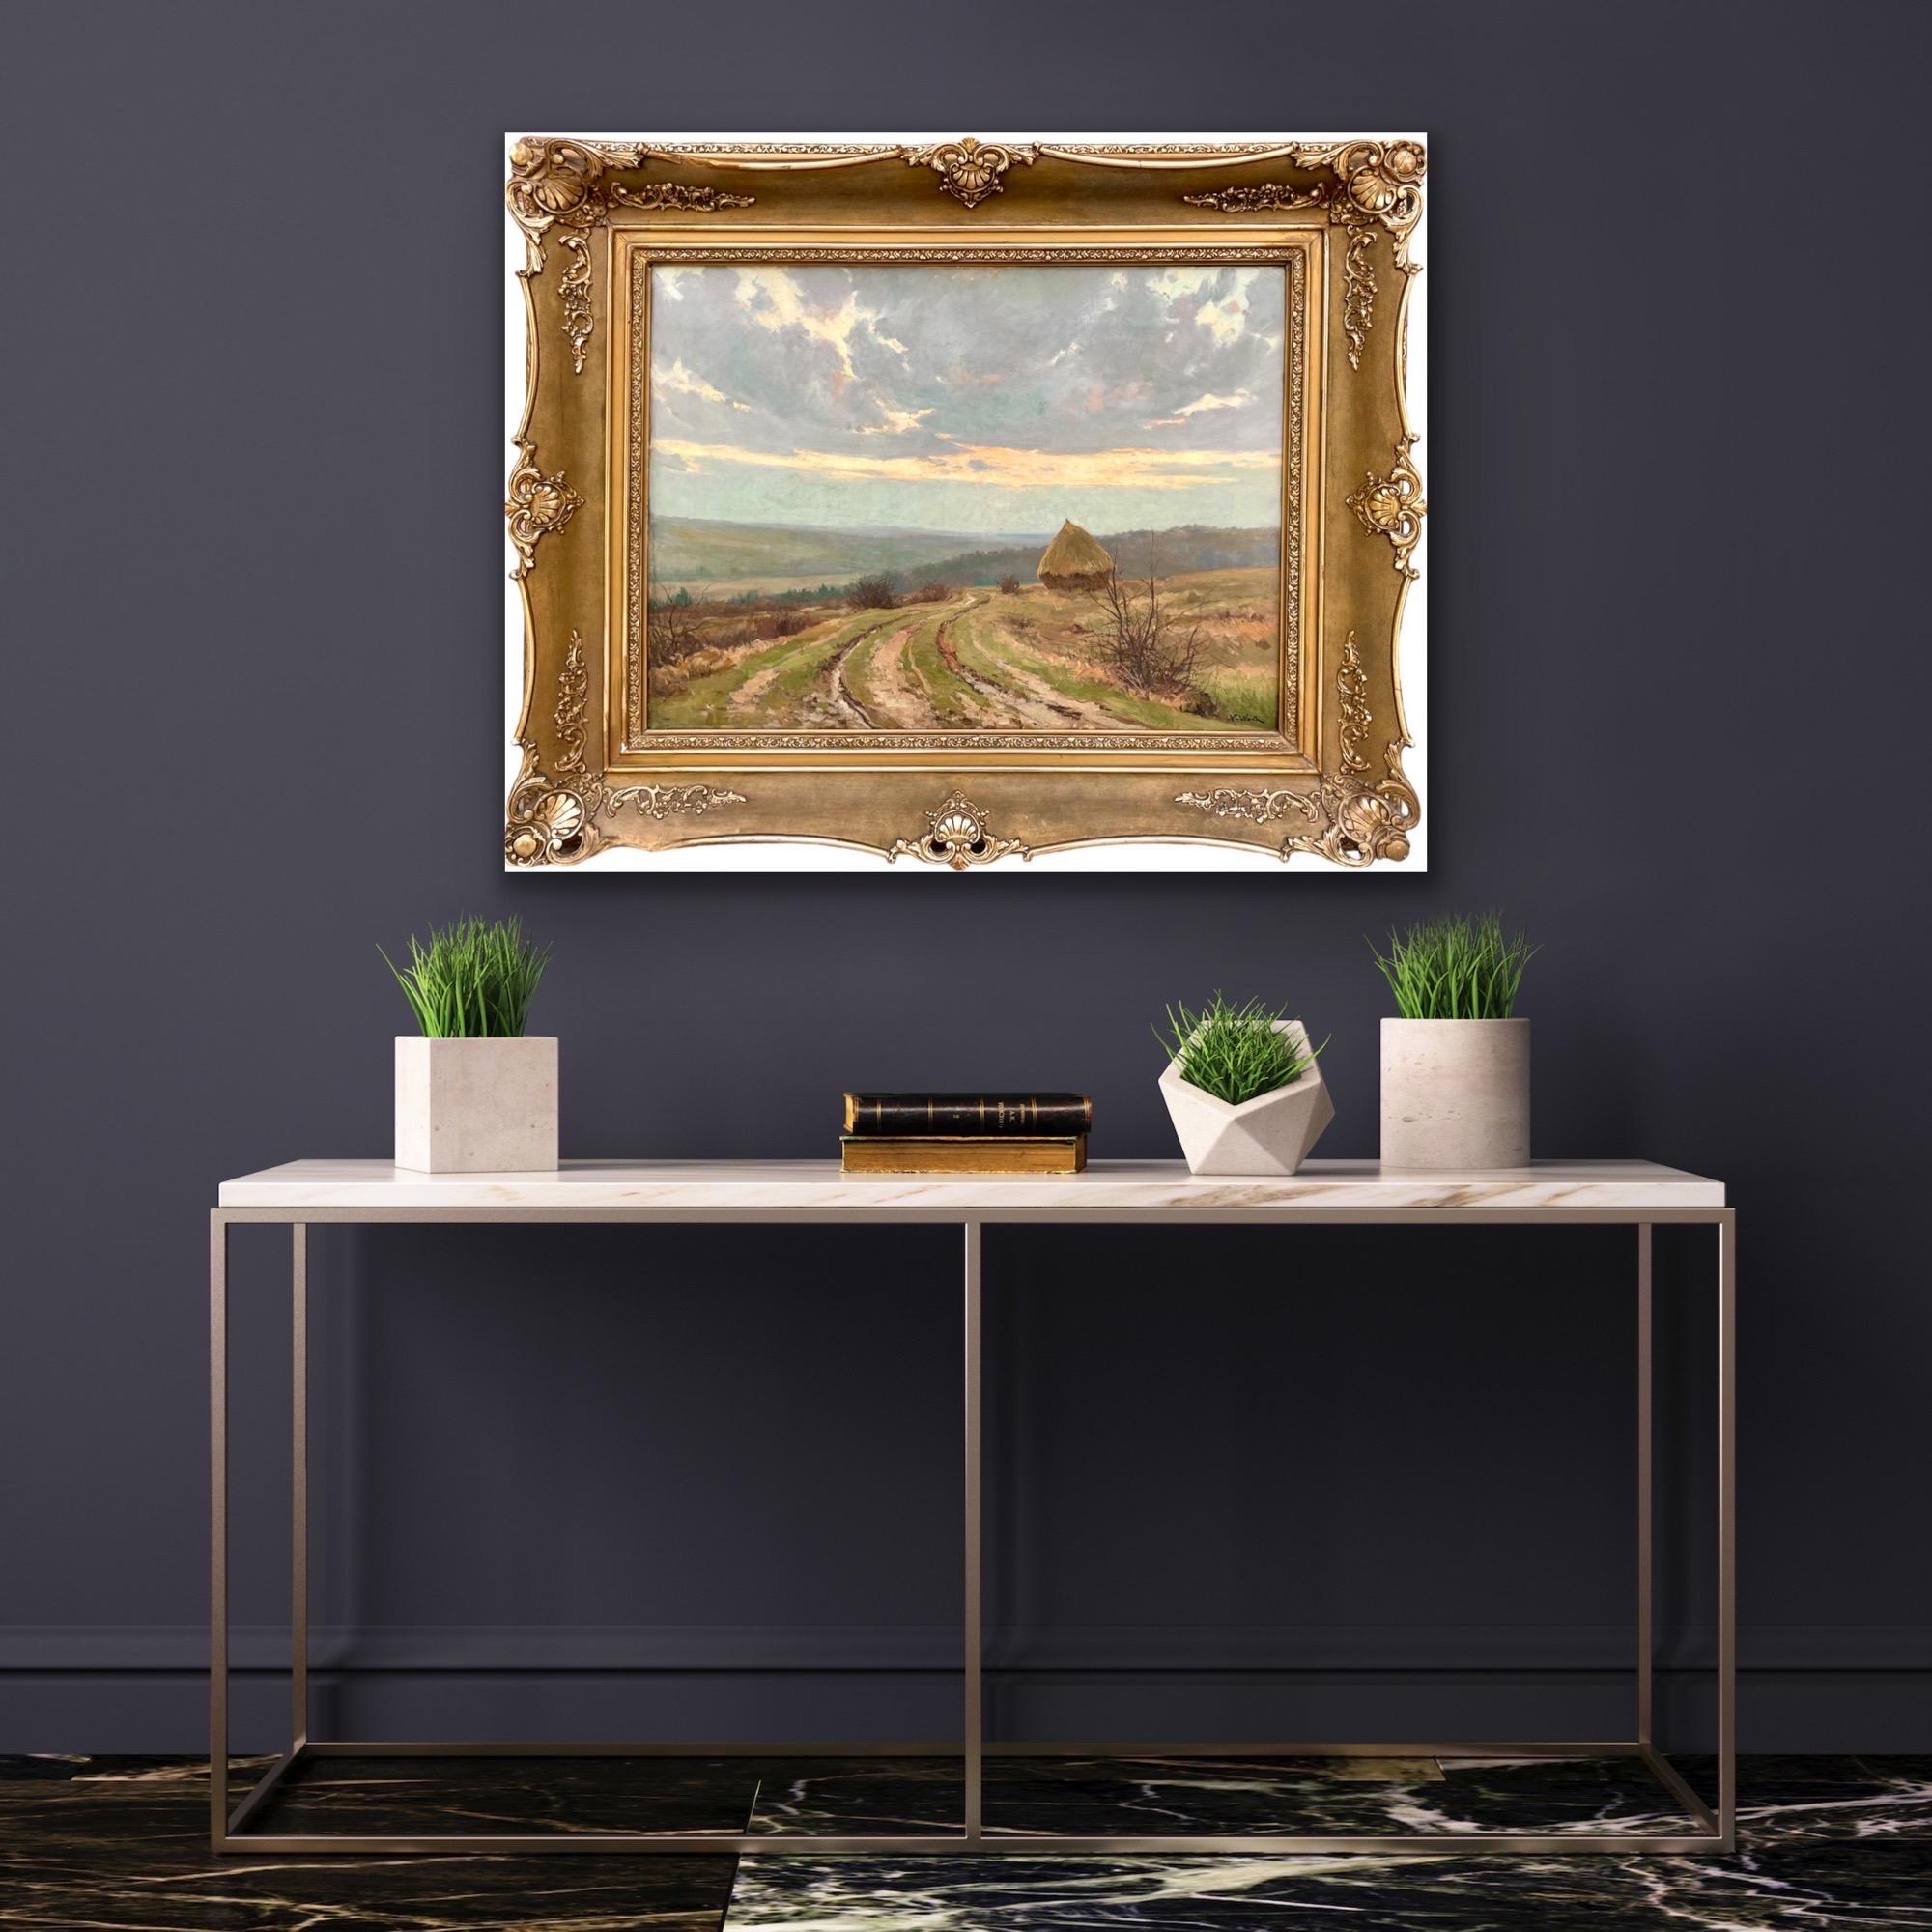 Large 19th century romantic painting - Hay Harvest - Une meule dans un paysage - Painting by Xavier Wurth